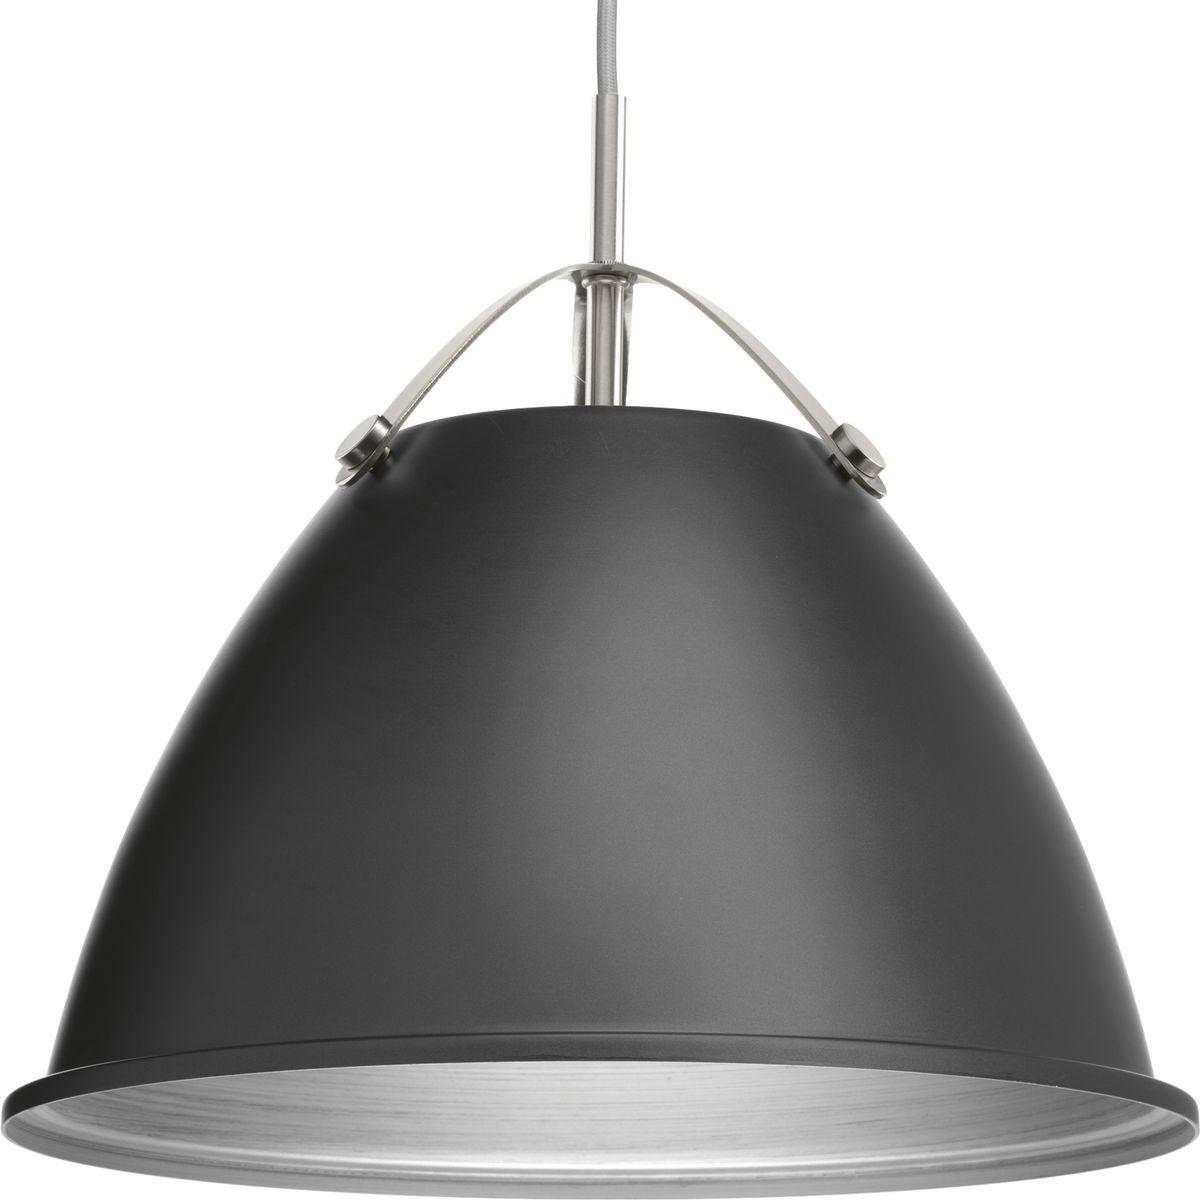 Hubbell P500052-143 Tre is a classic metal shade 15" pendant with an updated combination of a Graphite dome and Brushed Nickel accents. A tri-arm support adds a sense of architectural and industrial detailing, while the vented shade allows for both downward and upward illumi